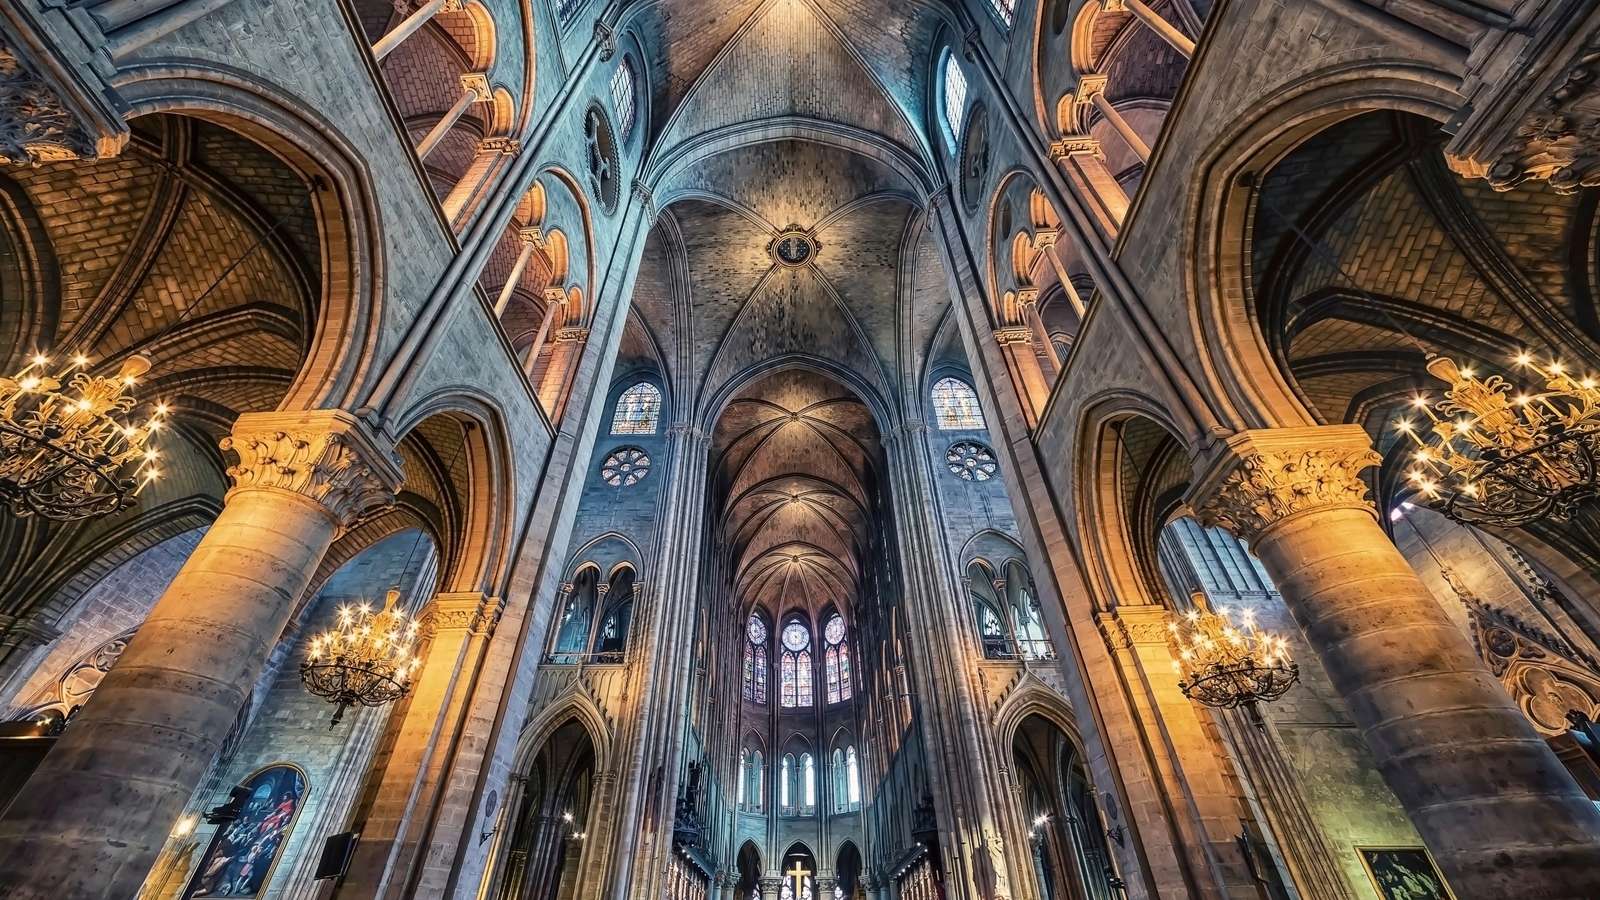 Beautiful Cathedrals puzzle online from photo